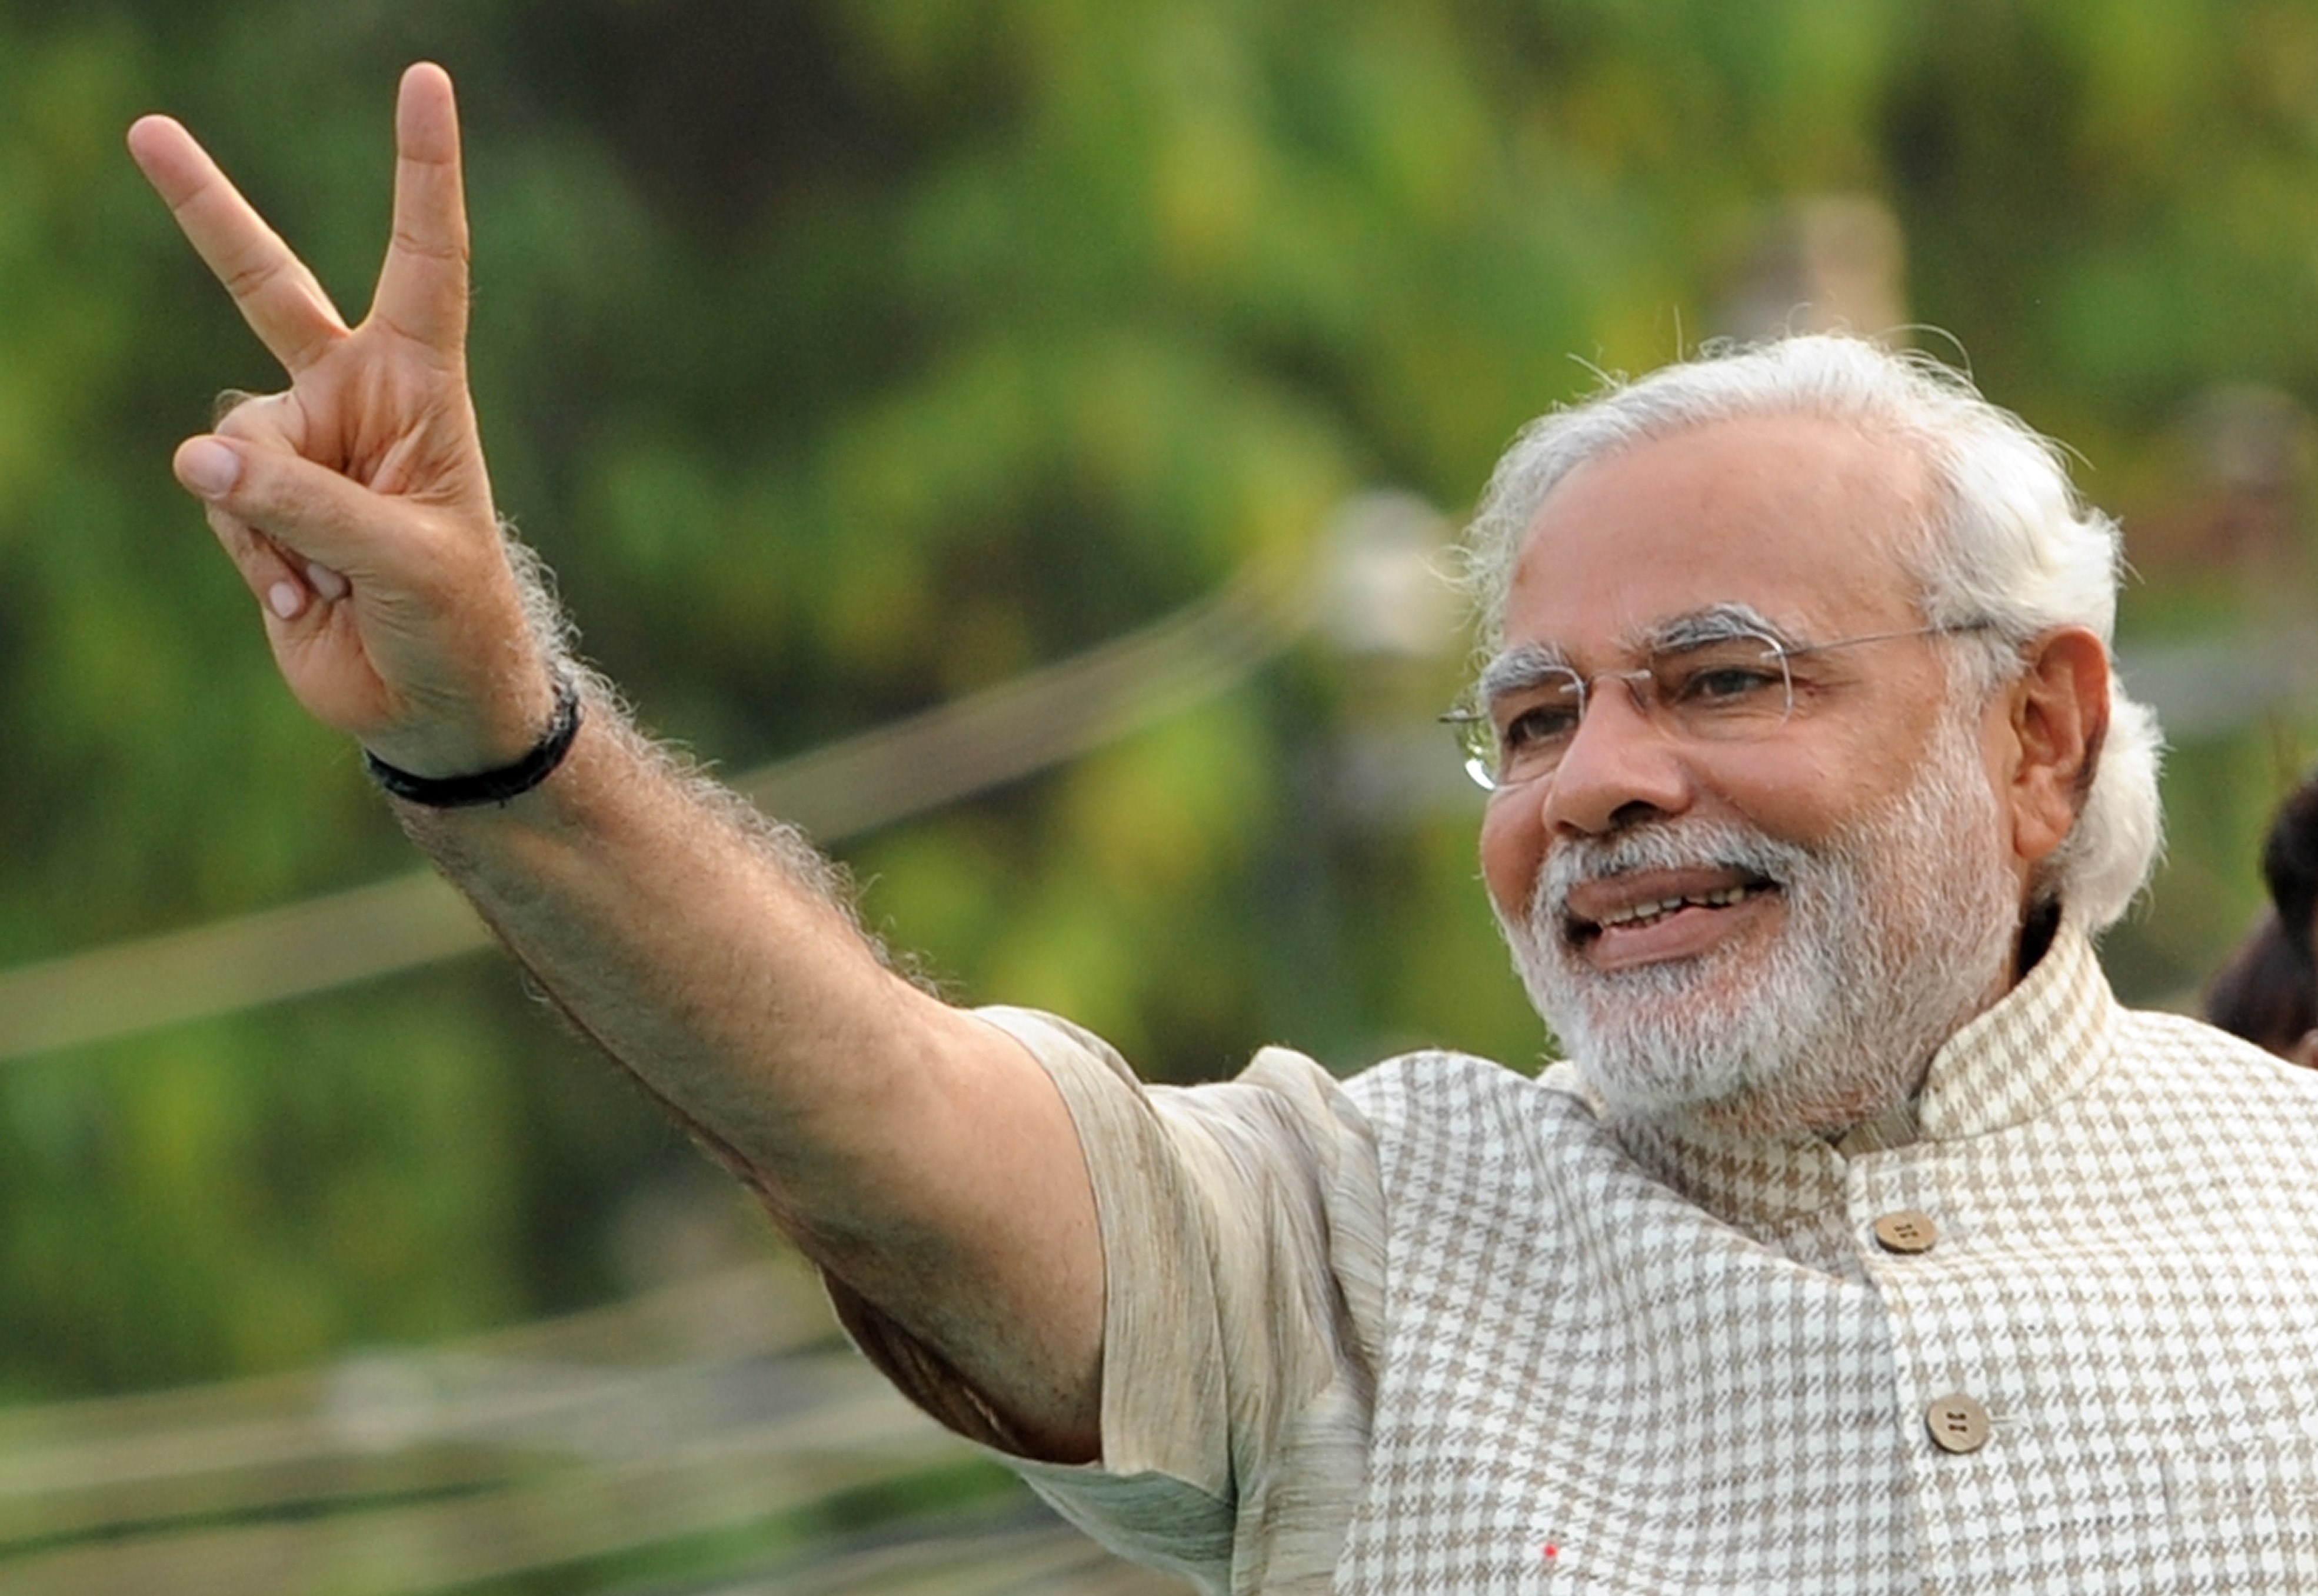 Chief Minister of western Gujarat state and main opposition Bharatiya Janata Party (BJP) prime ministerial candidate Narendra Modi flashes the victory sign as he arrives at a public rally after his victory in Vadodara on May 16, 2014. (Indranil Mukherjee—AFP/Getty Images)